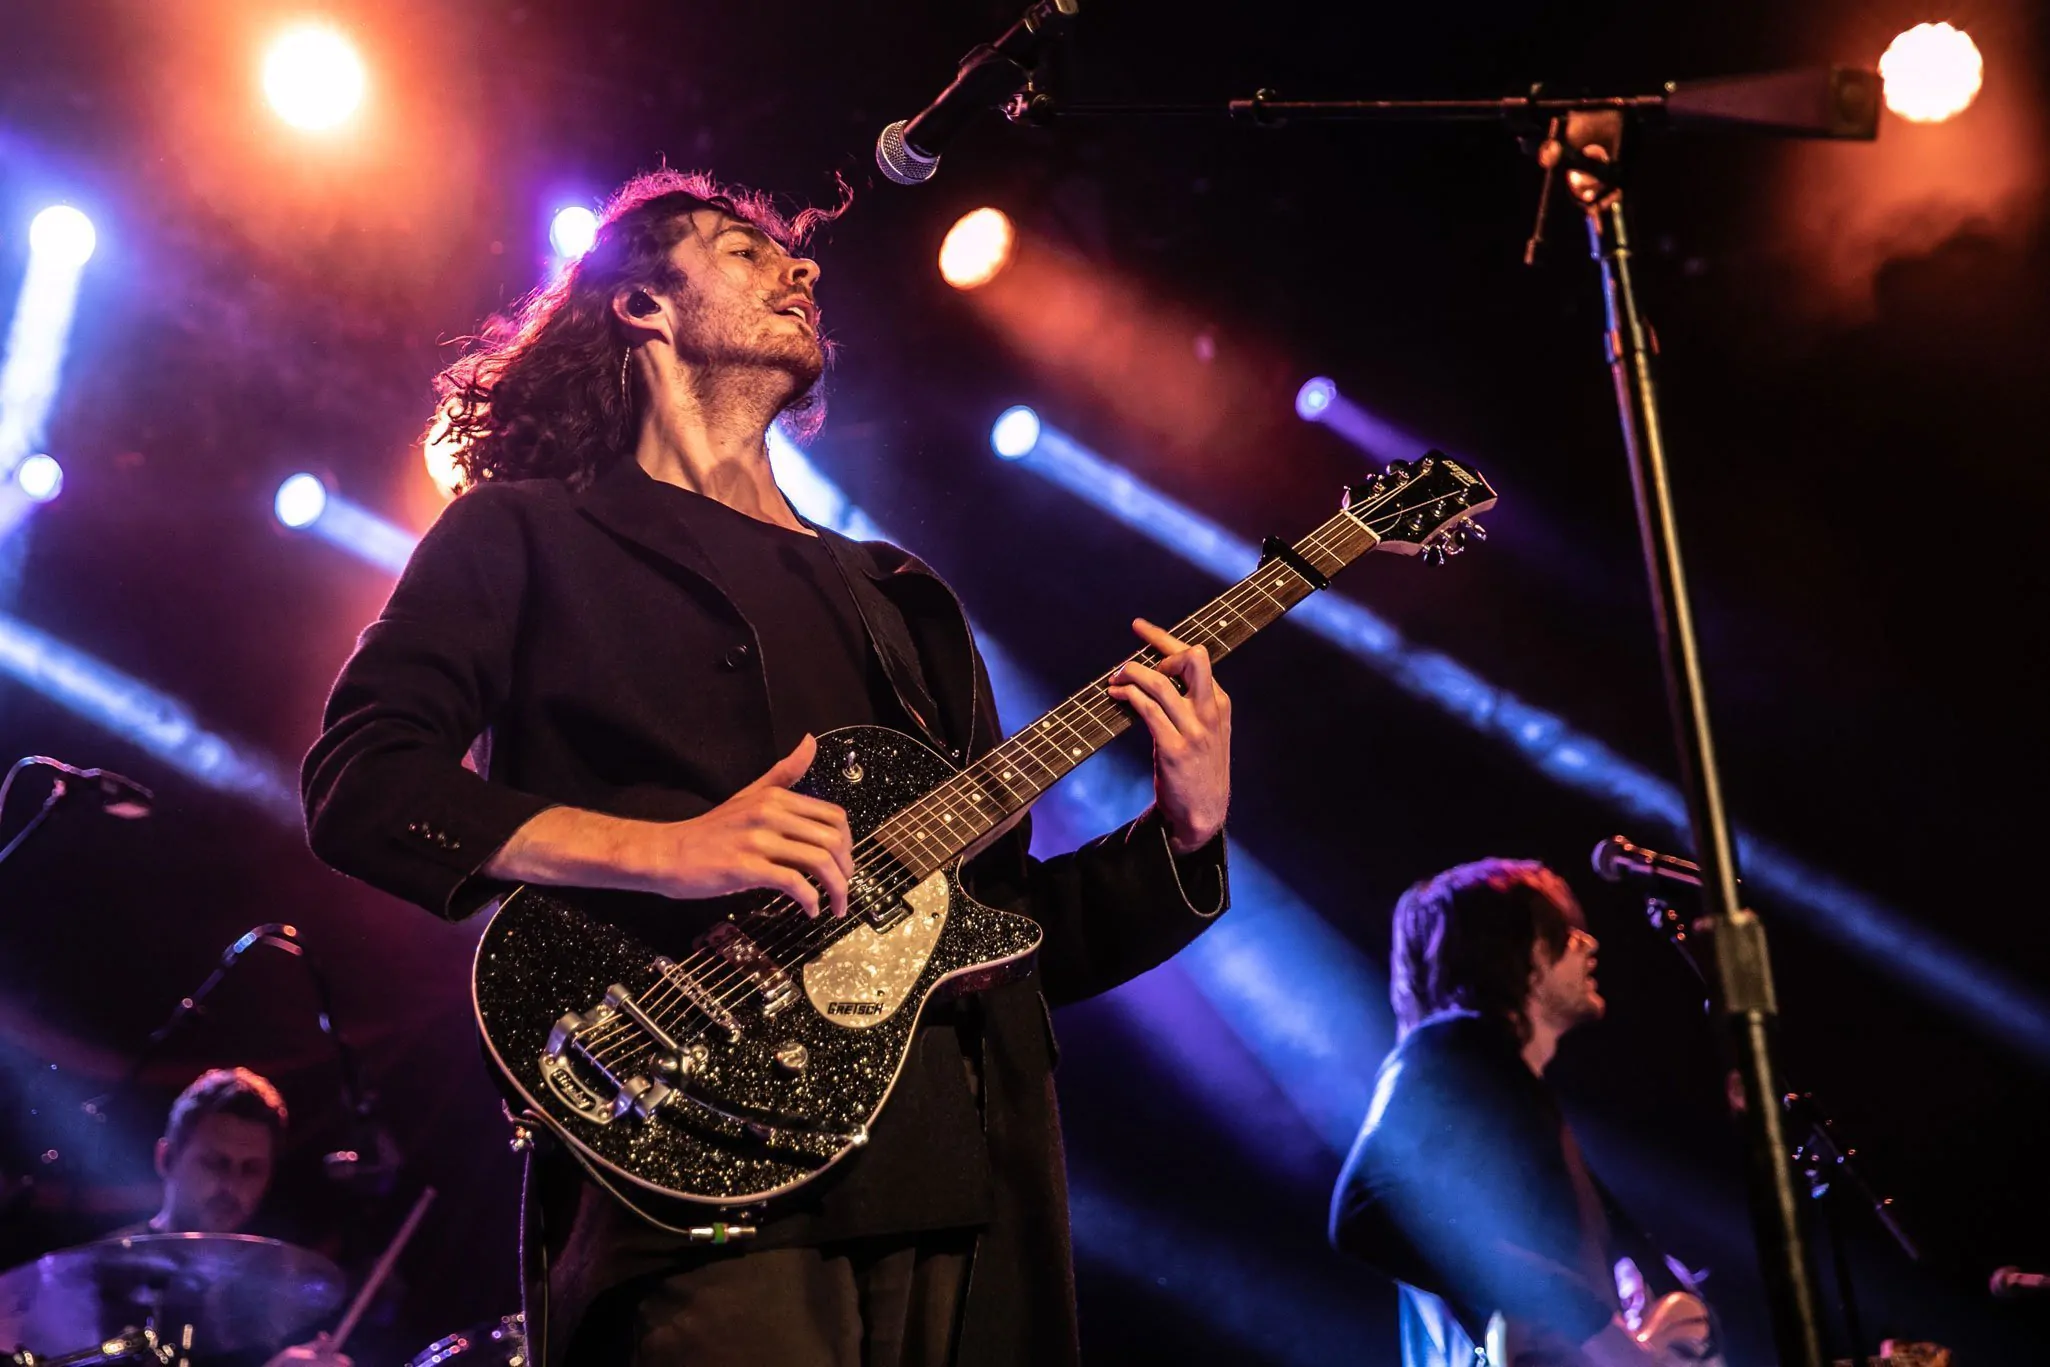 HOZIER to bring his Wasteland Baby! World Tour home to Dublin’s 3Arena on 10th December 2019